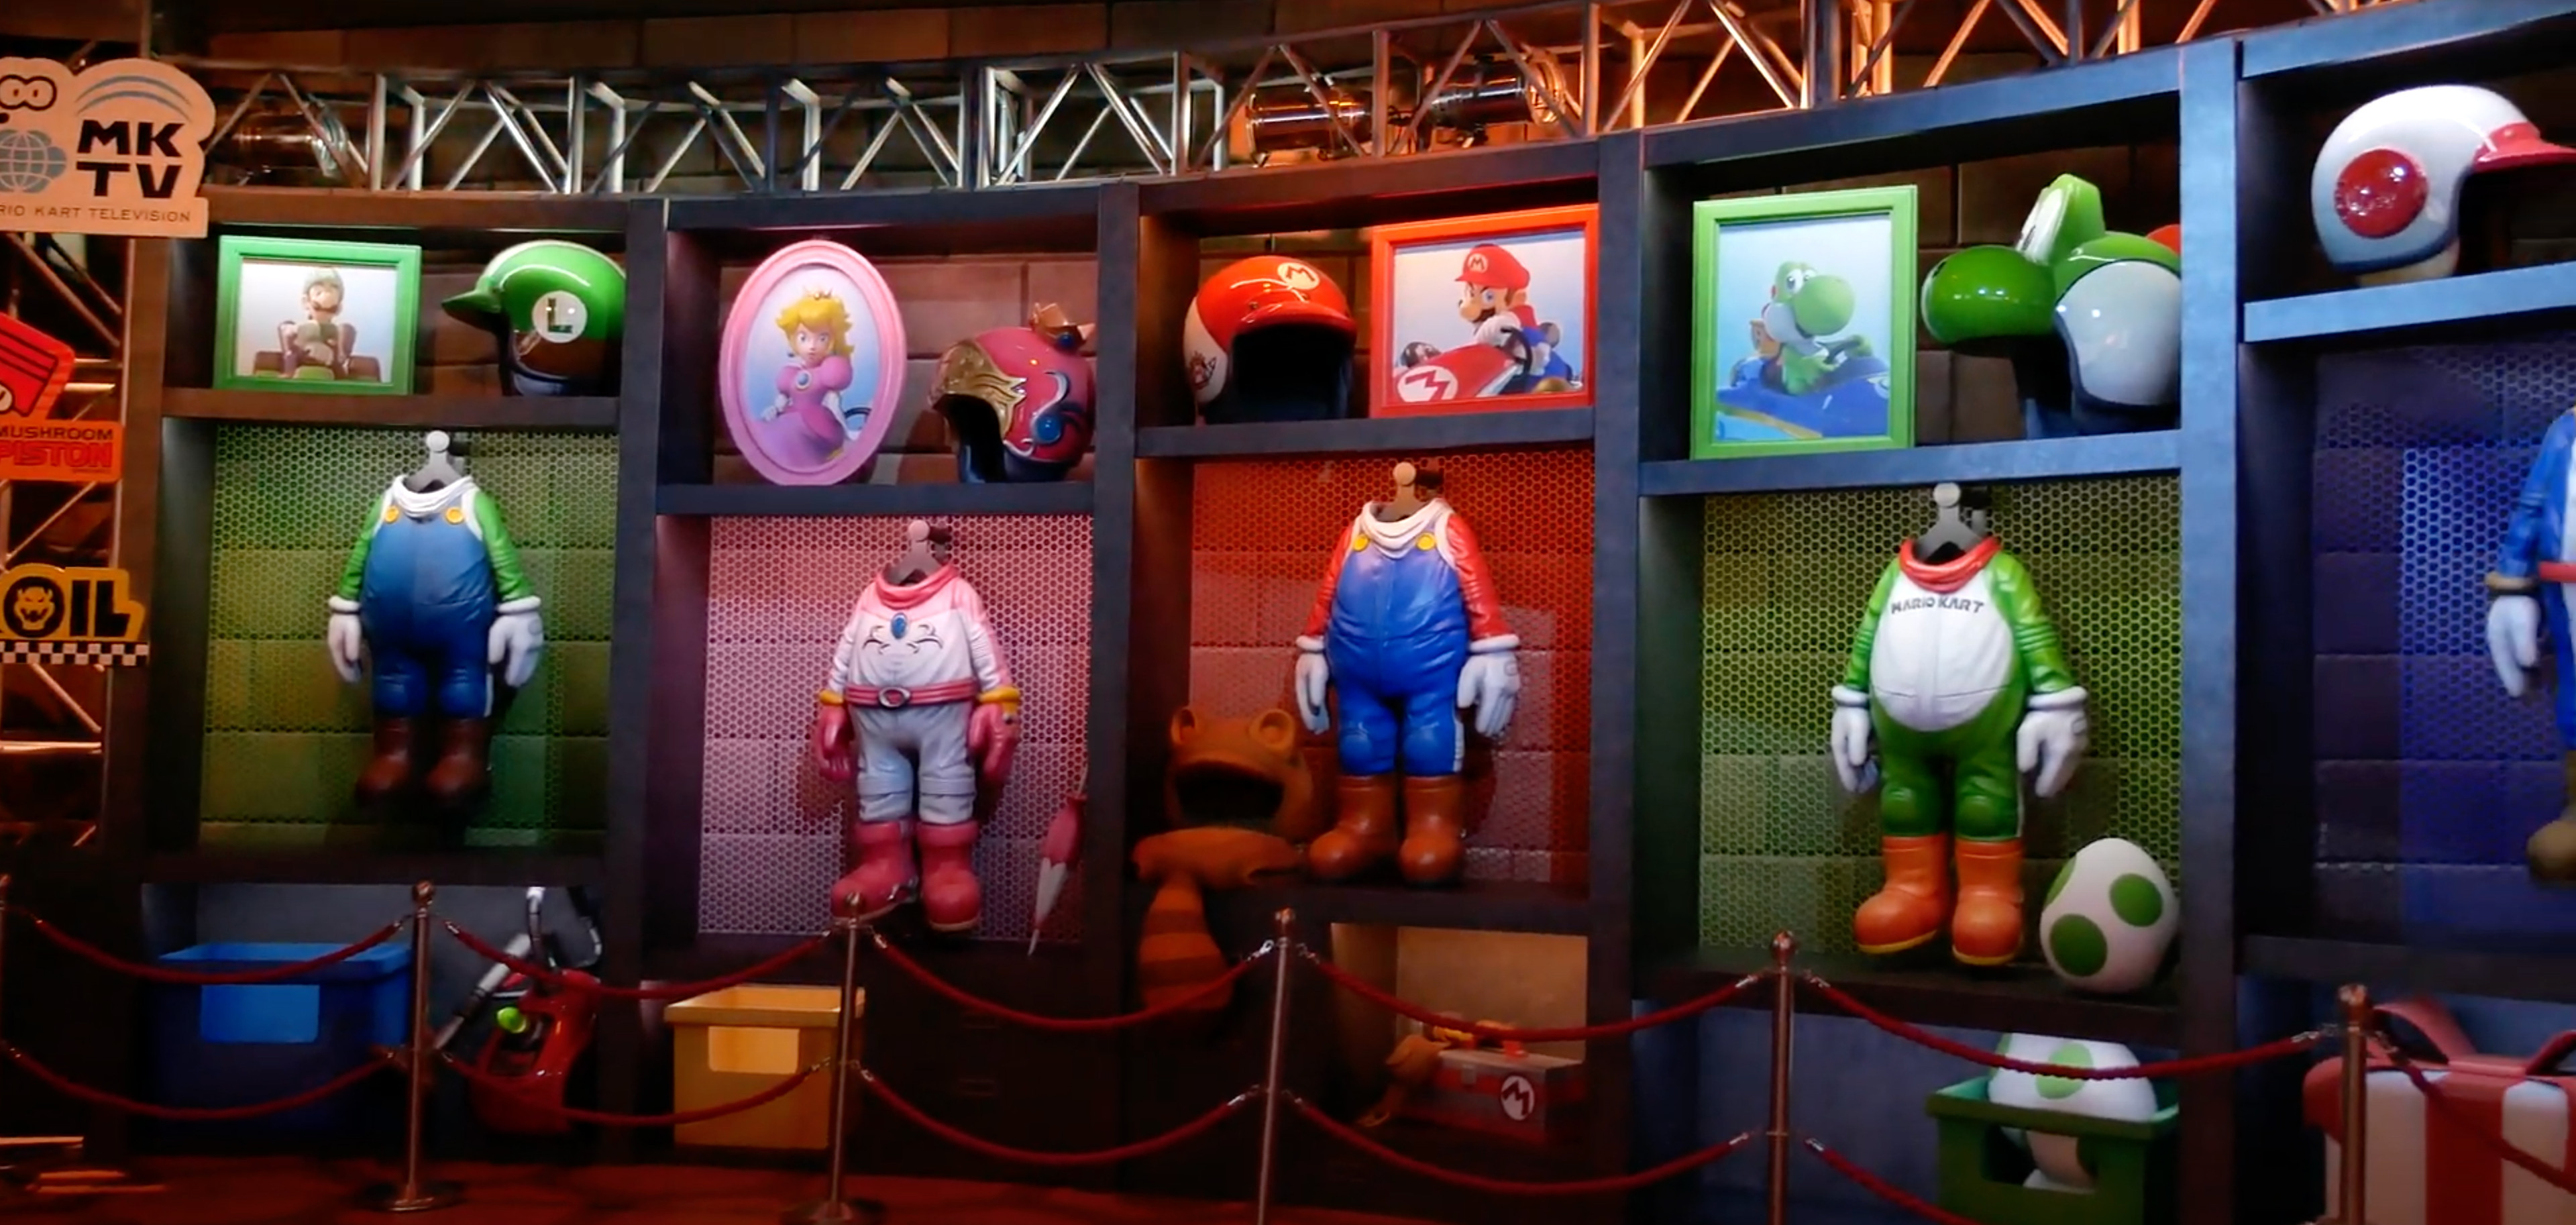 Close up of the "Green Room" where guests gear up before going onto the ride. I helped model the helmets found in this area.
Photo Credit: UniversalParksNewsToday